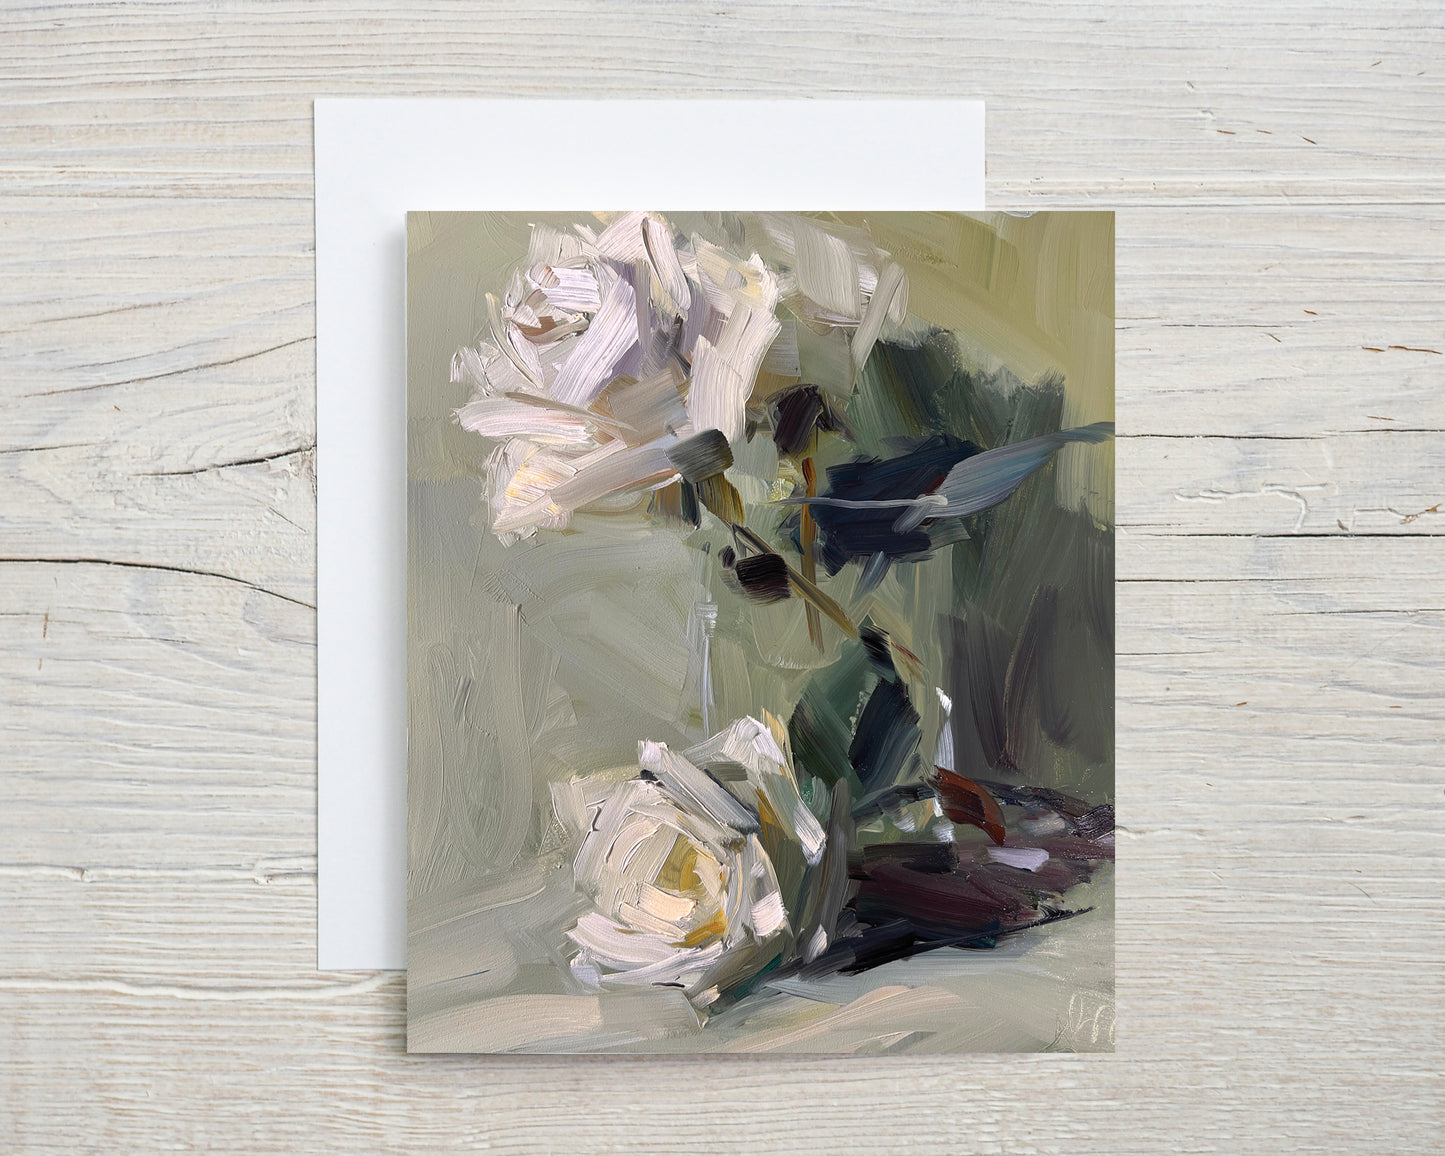 NEW Two White Roses, Set of 8 notecards and envelopes